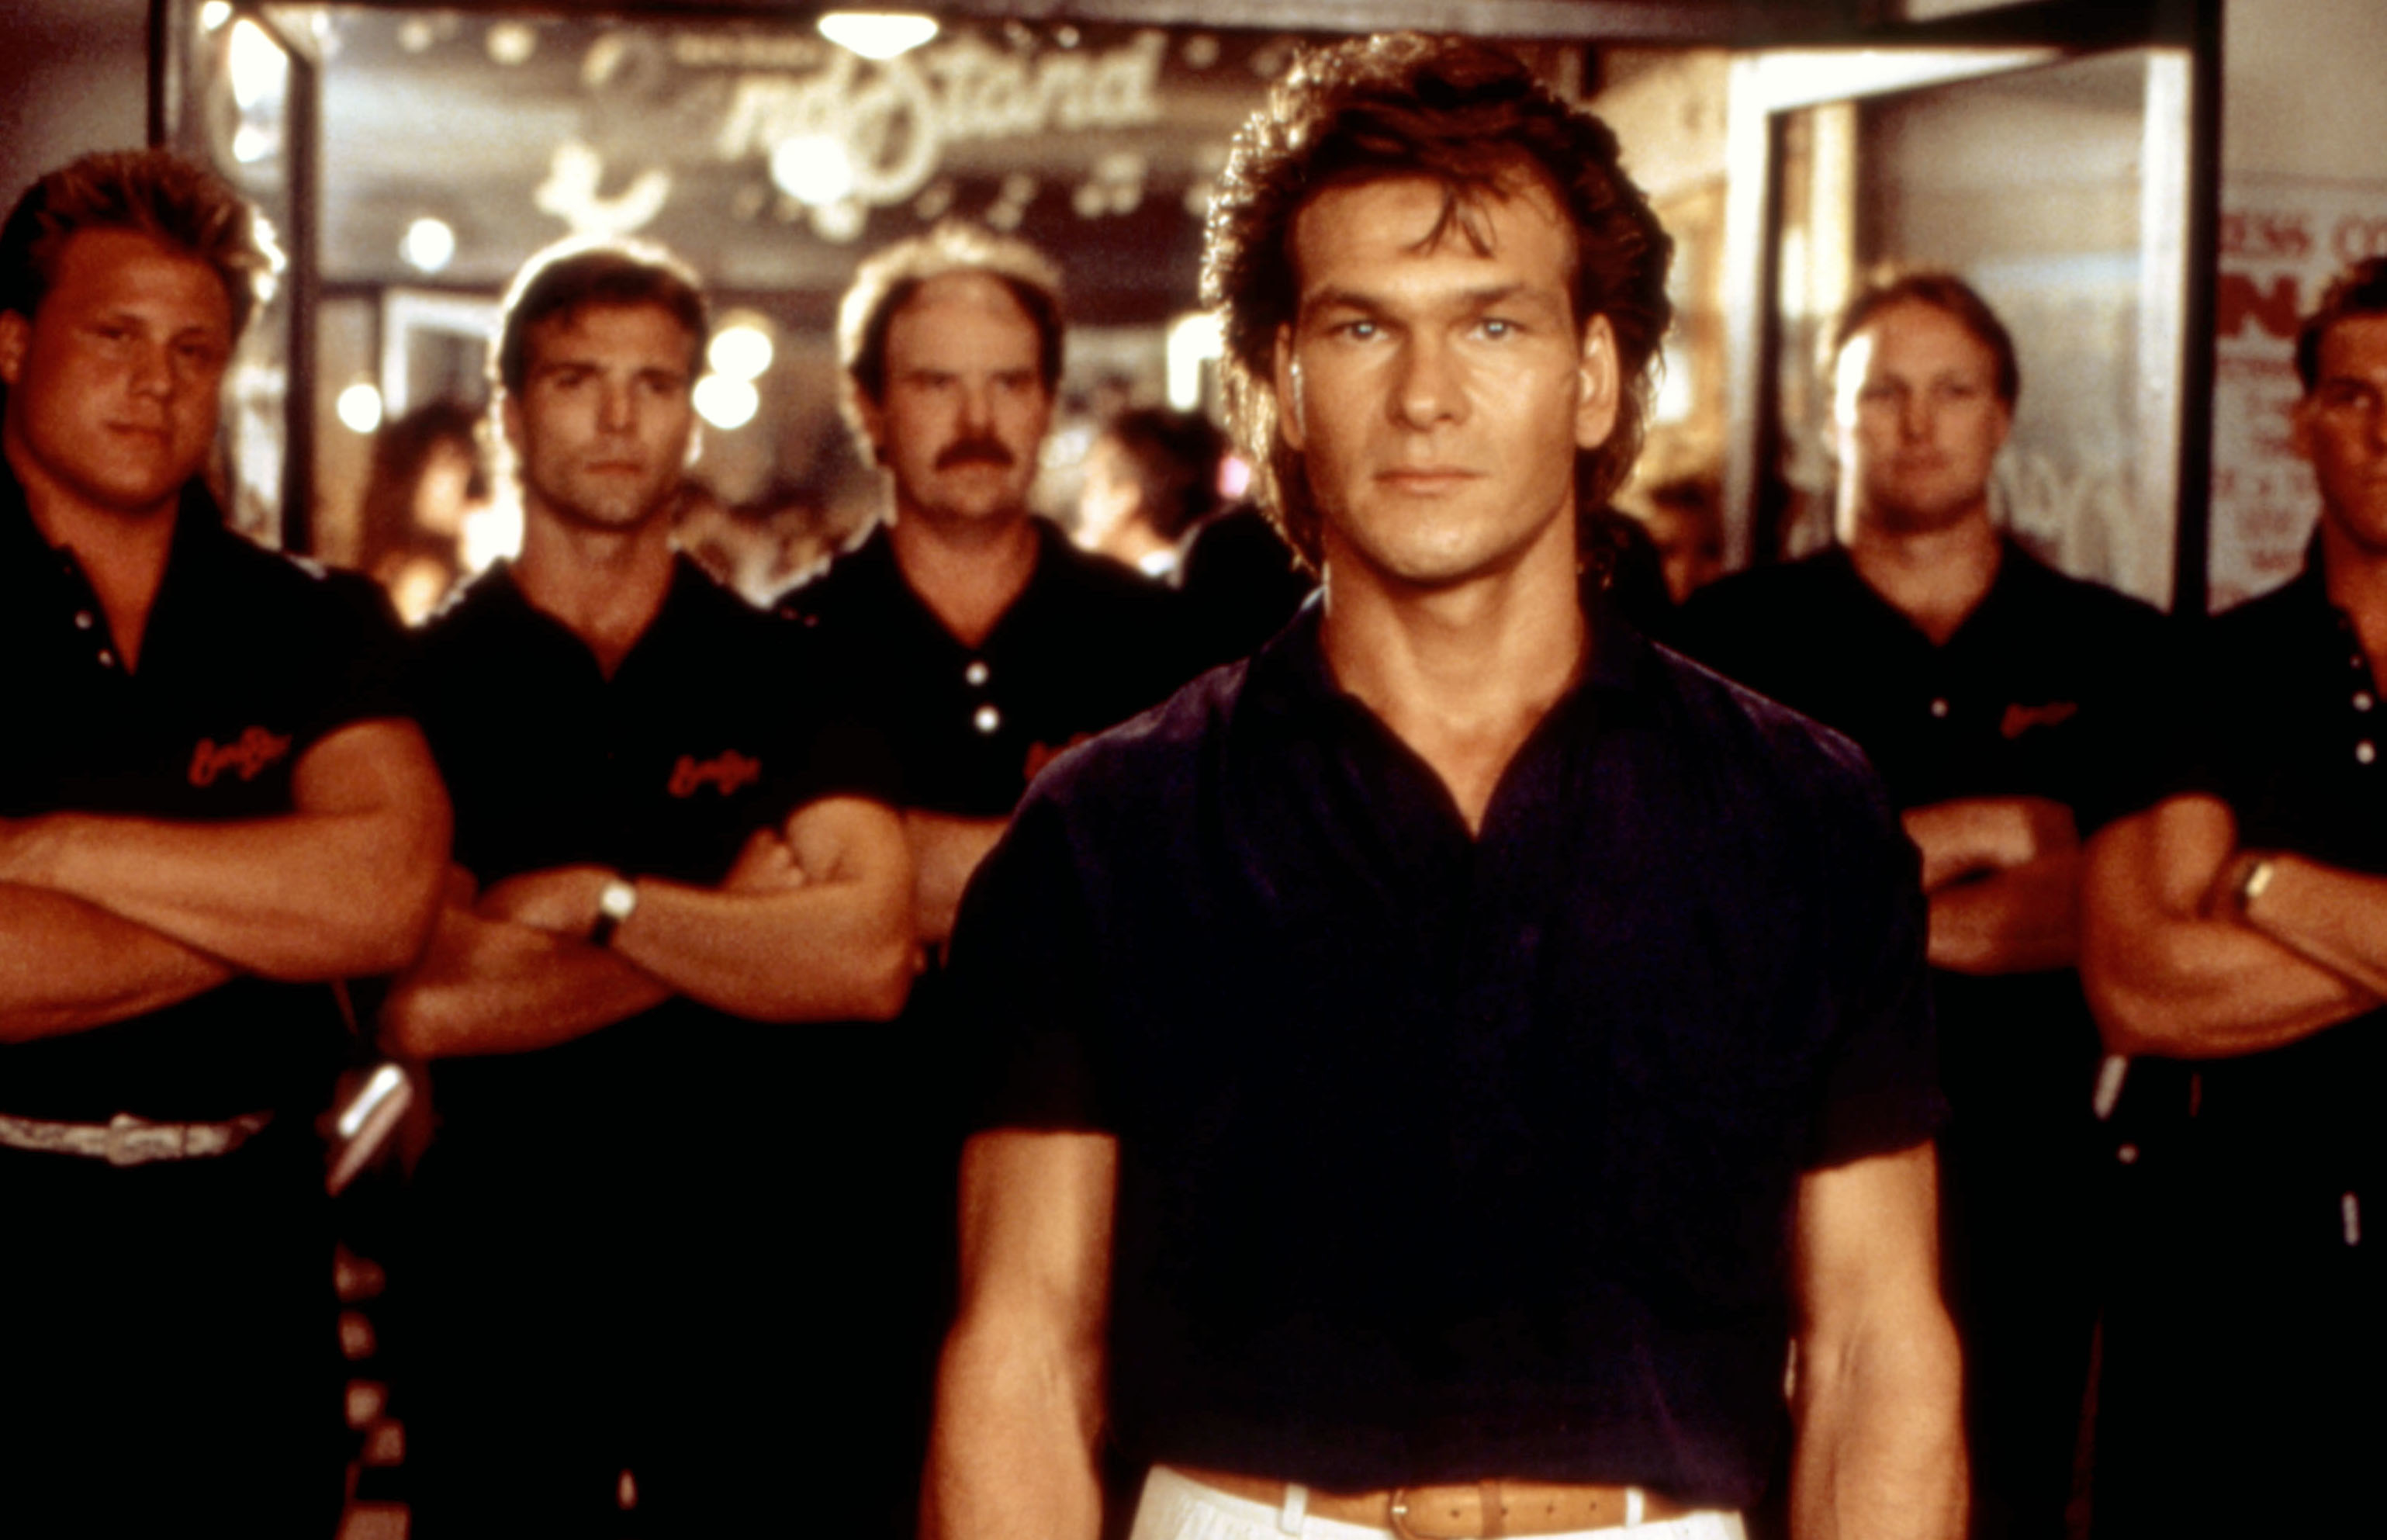 Patrick Swayze stands in front with a group in a bar in the movie &quot;Road House.&quot;